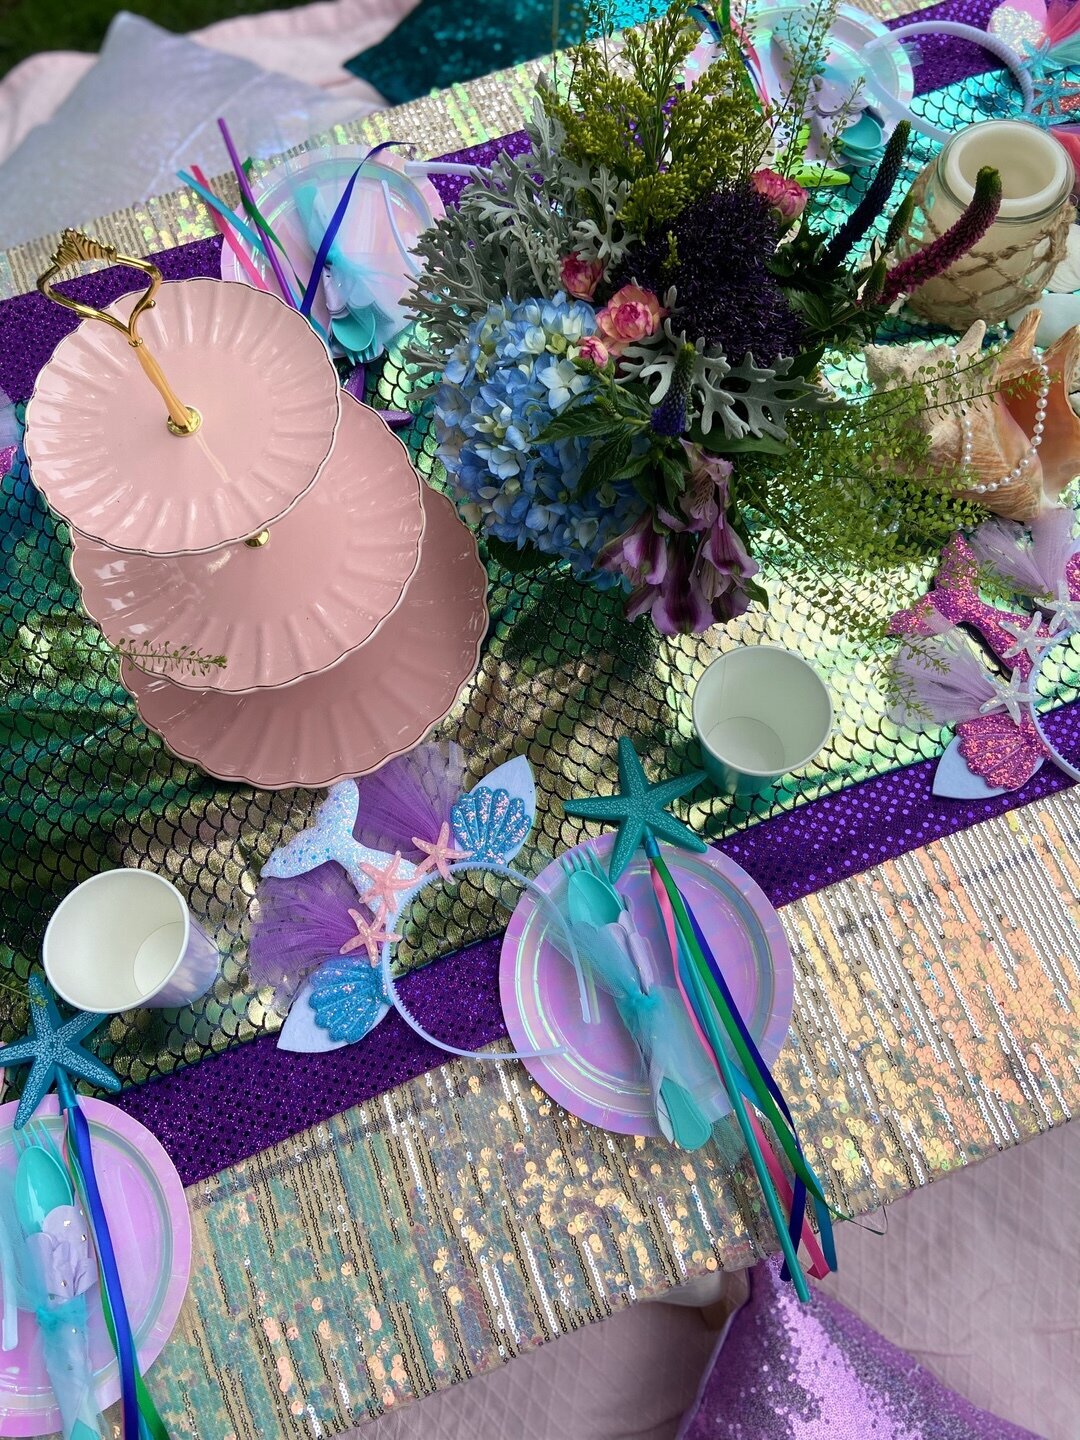 mermaid themed birthday party with metallic picnic decor and pillows